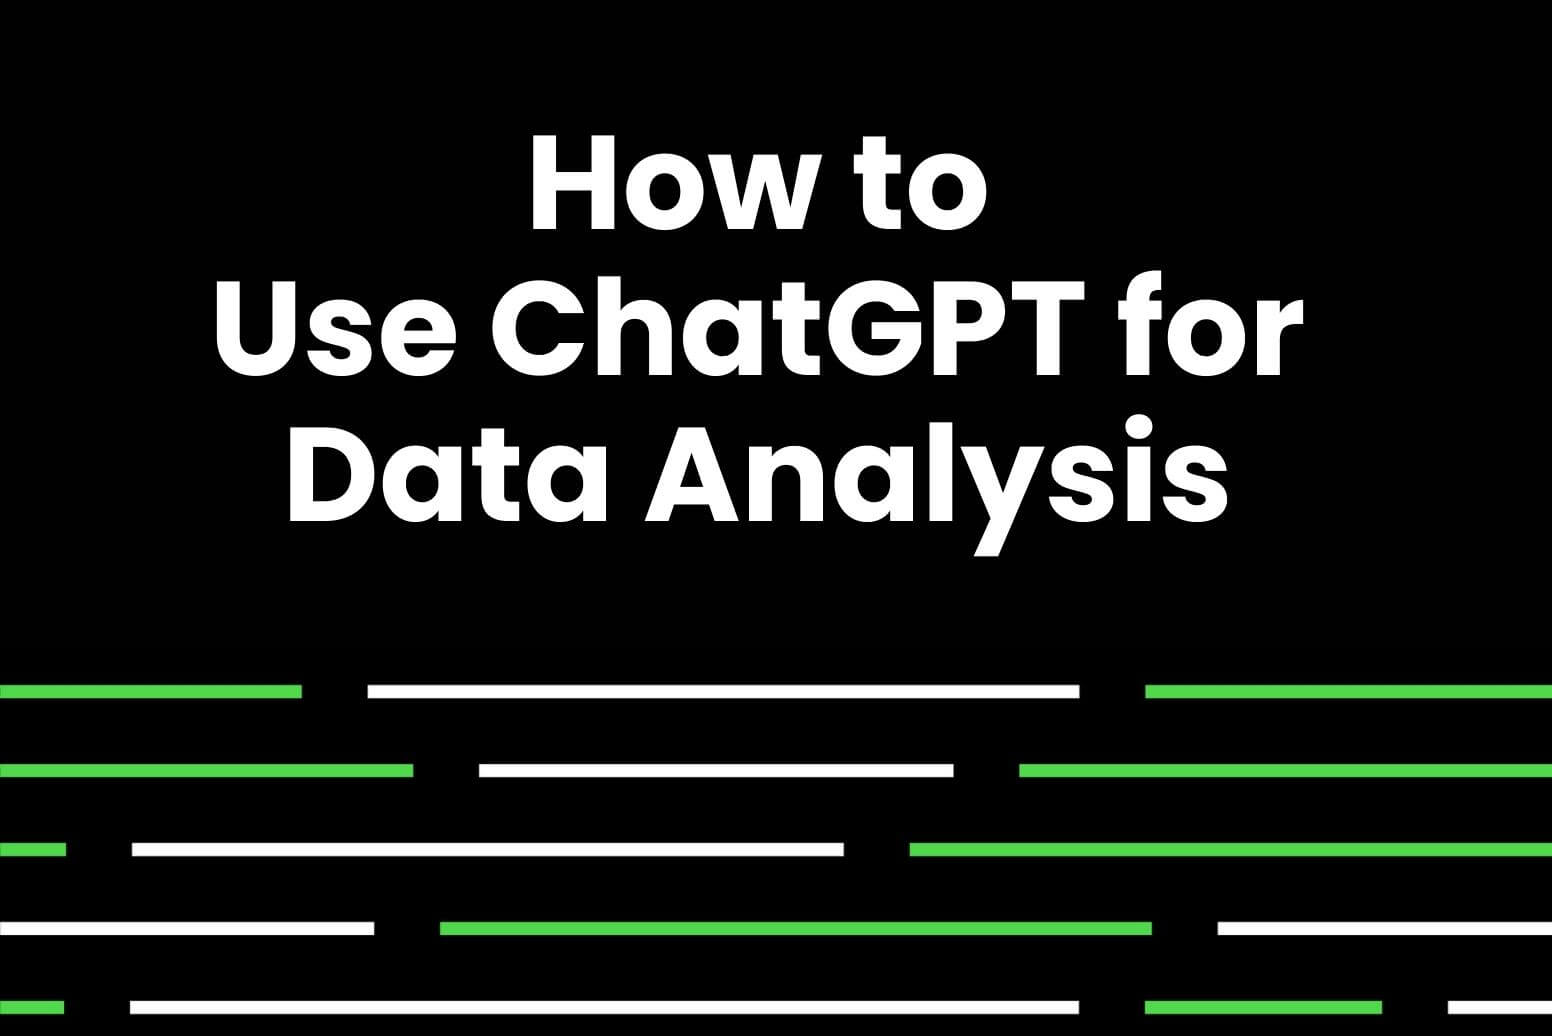 How to use ChatGPT for data analysis